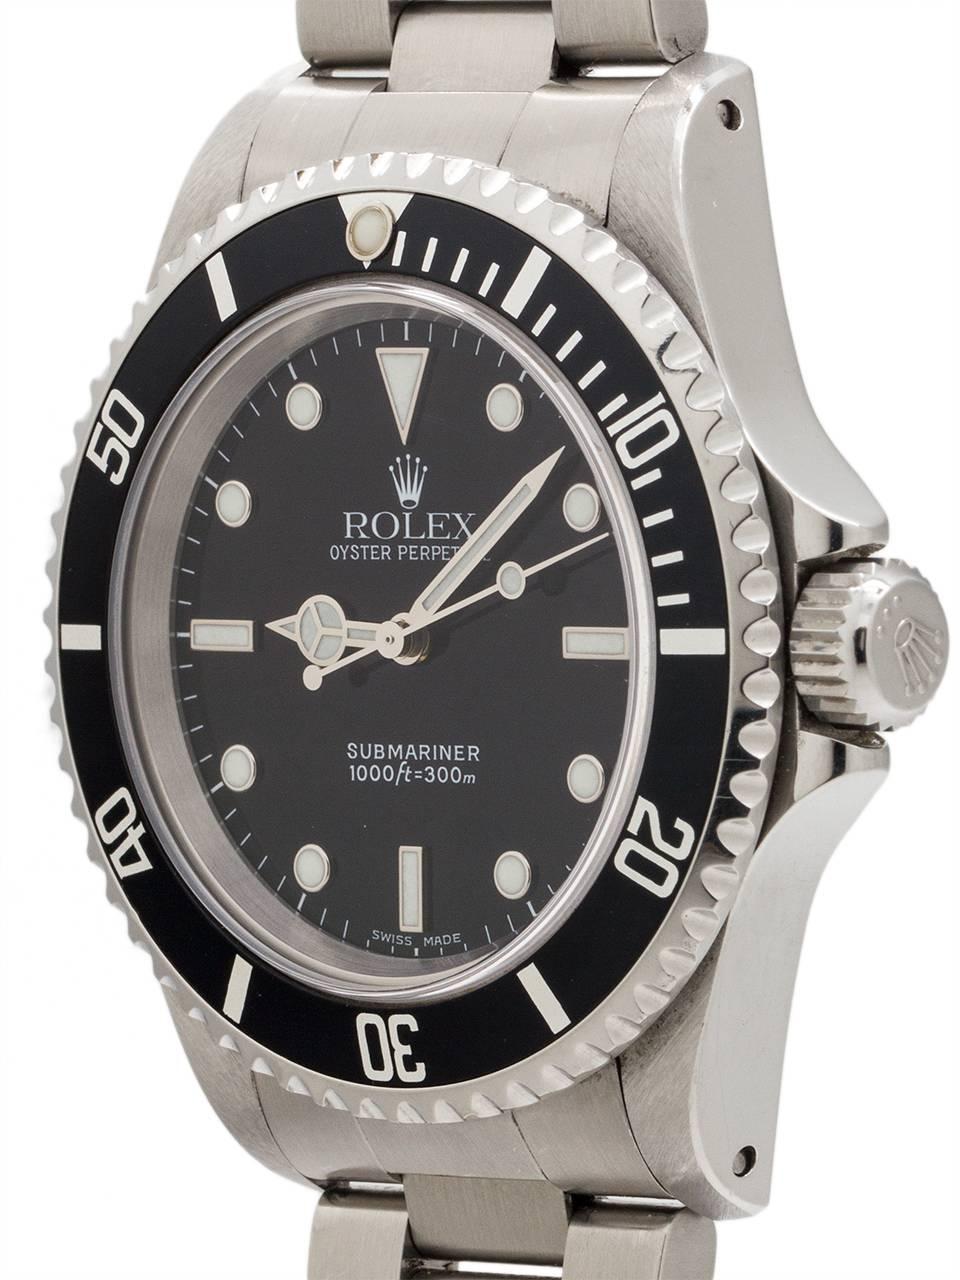 
Classic Rolex Submariner stainless steel ref# 14060 serial #P7 circa 2000 complete with box, papers, booklet, anchor, and service papers. Featuring 40mm diameter case with sapphire crystal and unidirectional elapsed time bezel. Very clean example